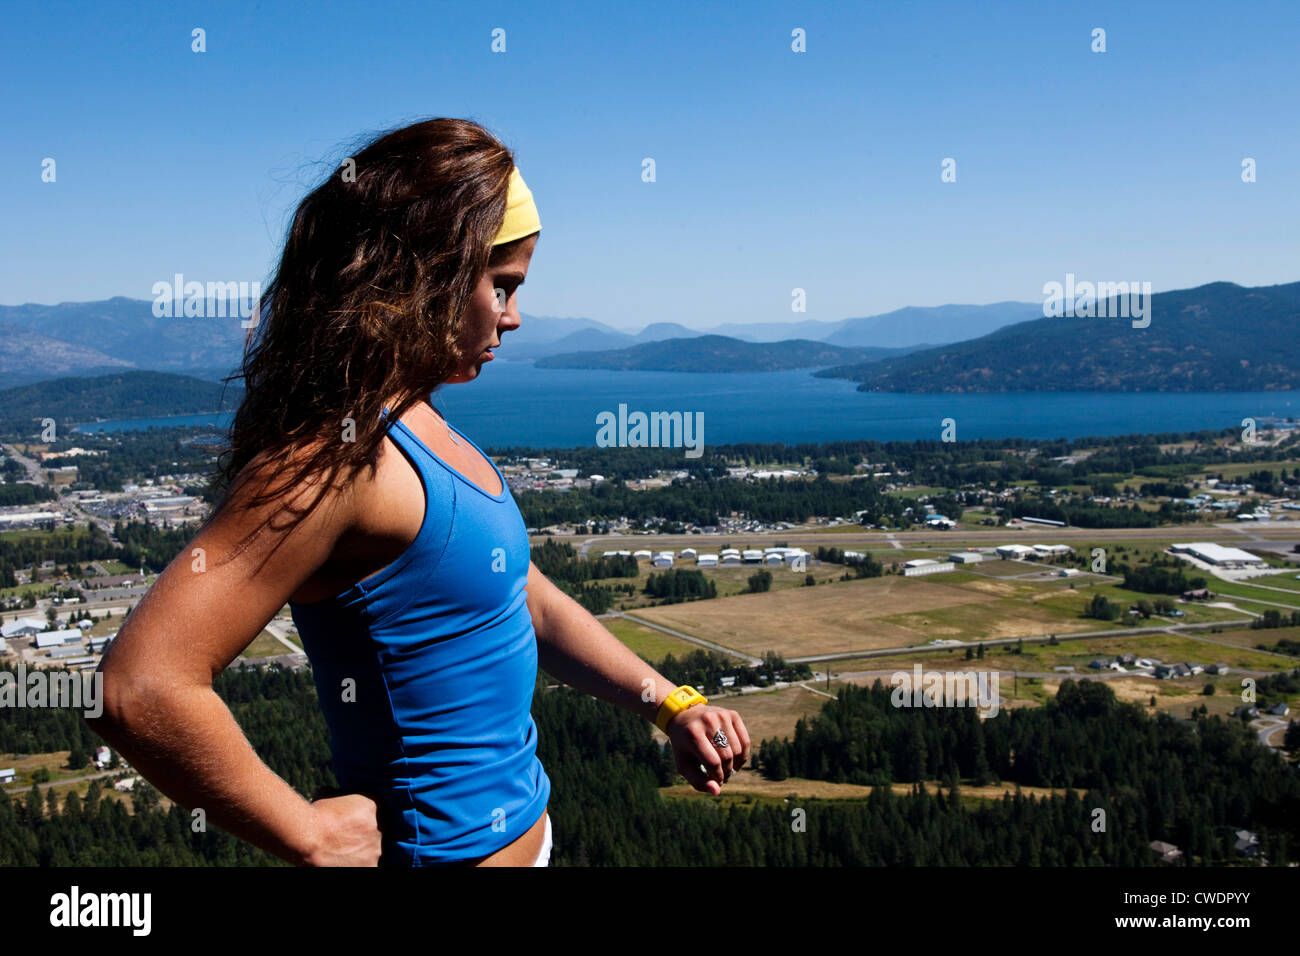 A happy athletic woman hiking stops and looks at her watch overlooking a lake in Idaho. Stock Photo